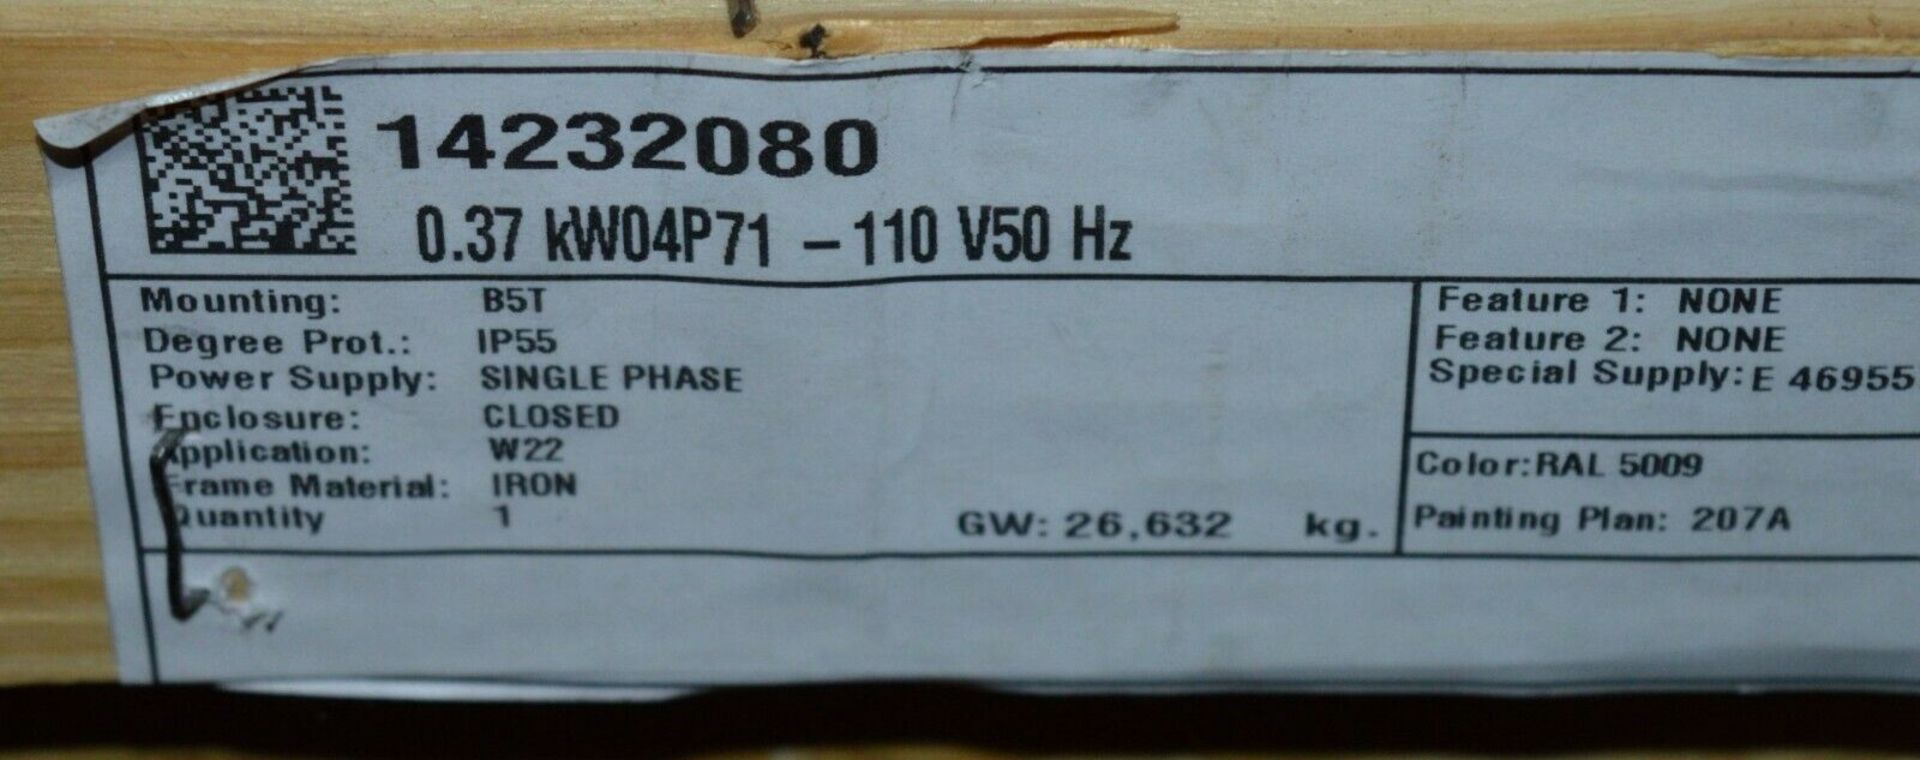 1 x Weg W22 110v IP55 Single Phase Electric Motor - Brand New and Boxed - CL295 - Location: - Image 2 of 7